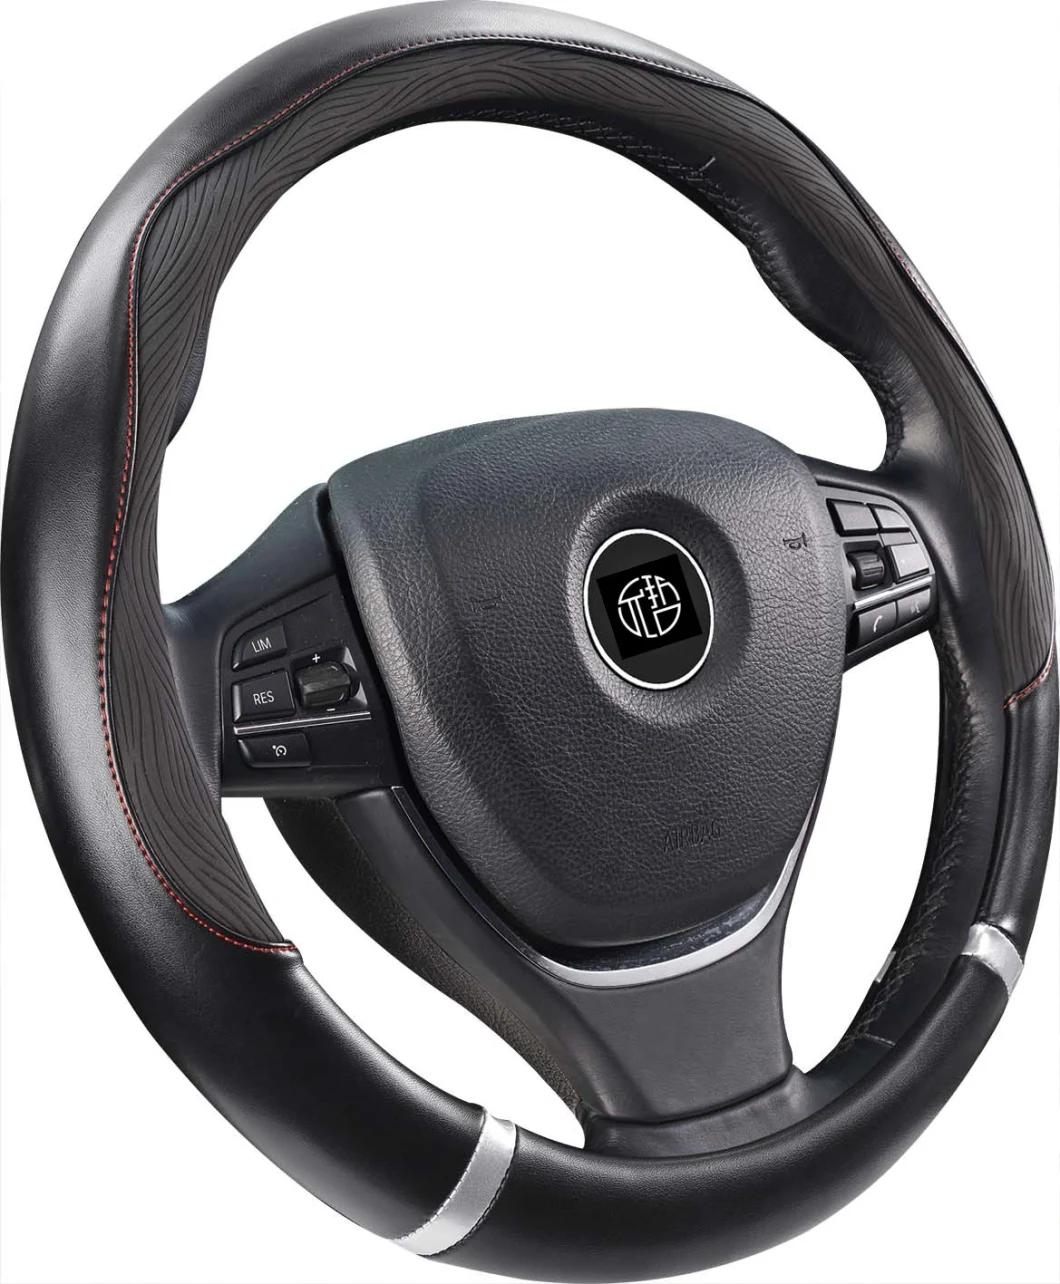 Walmart Hot Selling Item Splicing Faux Leather Wheel Covers for Car